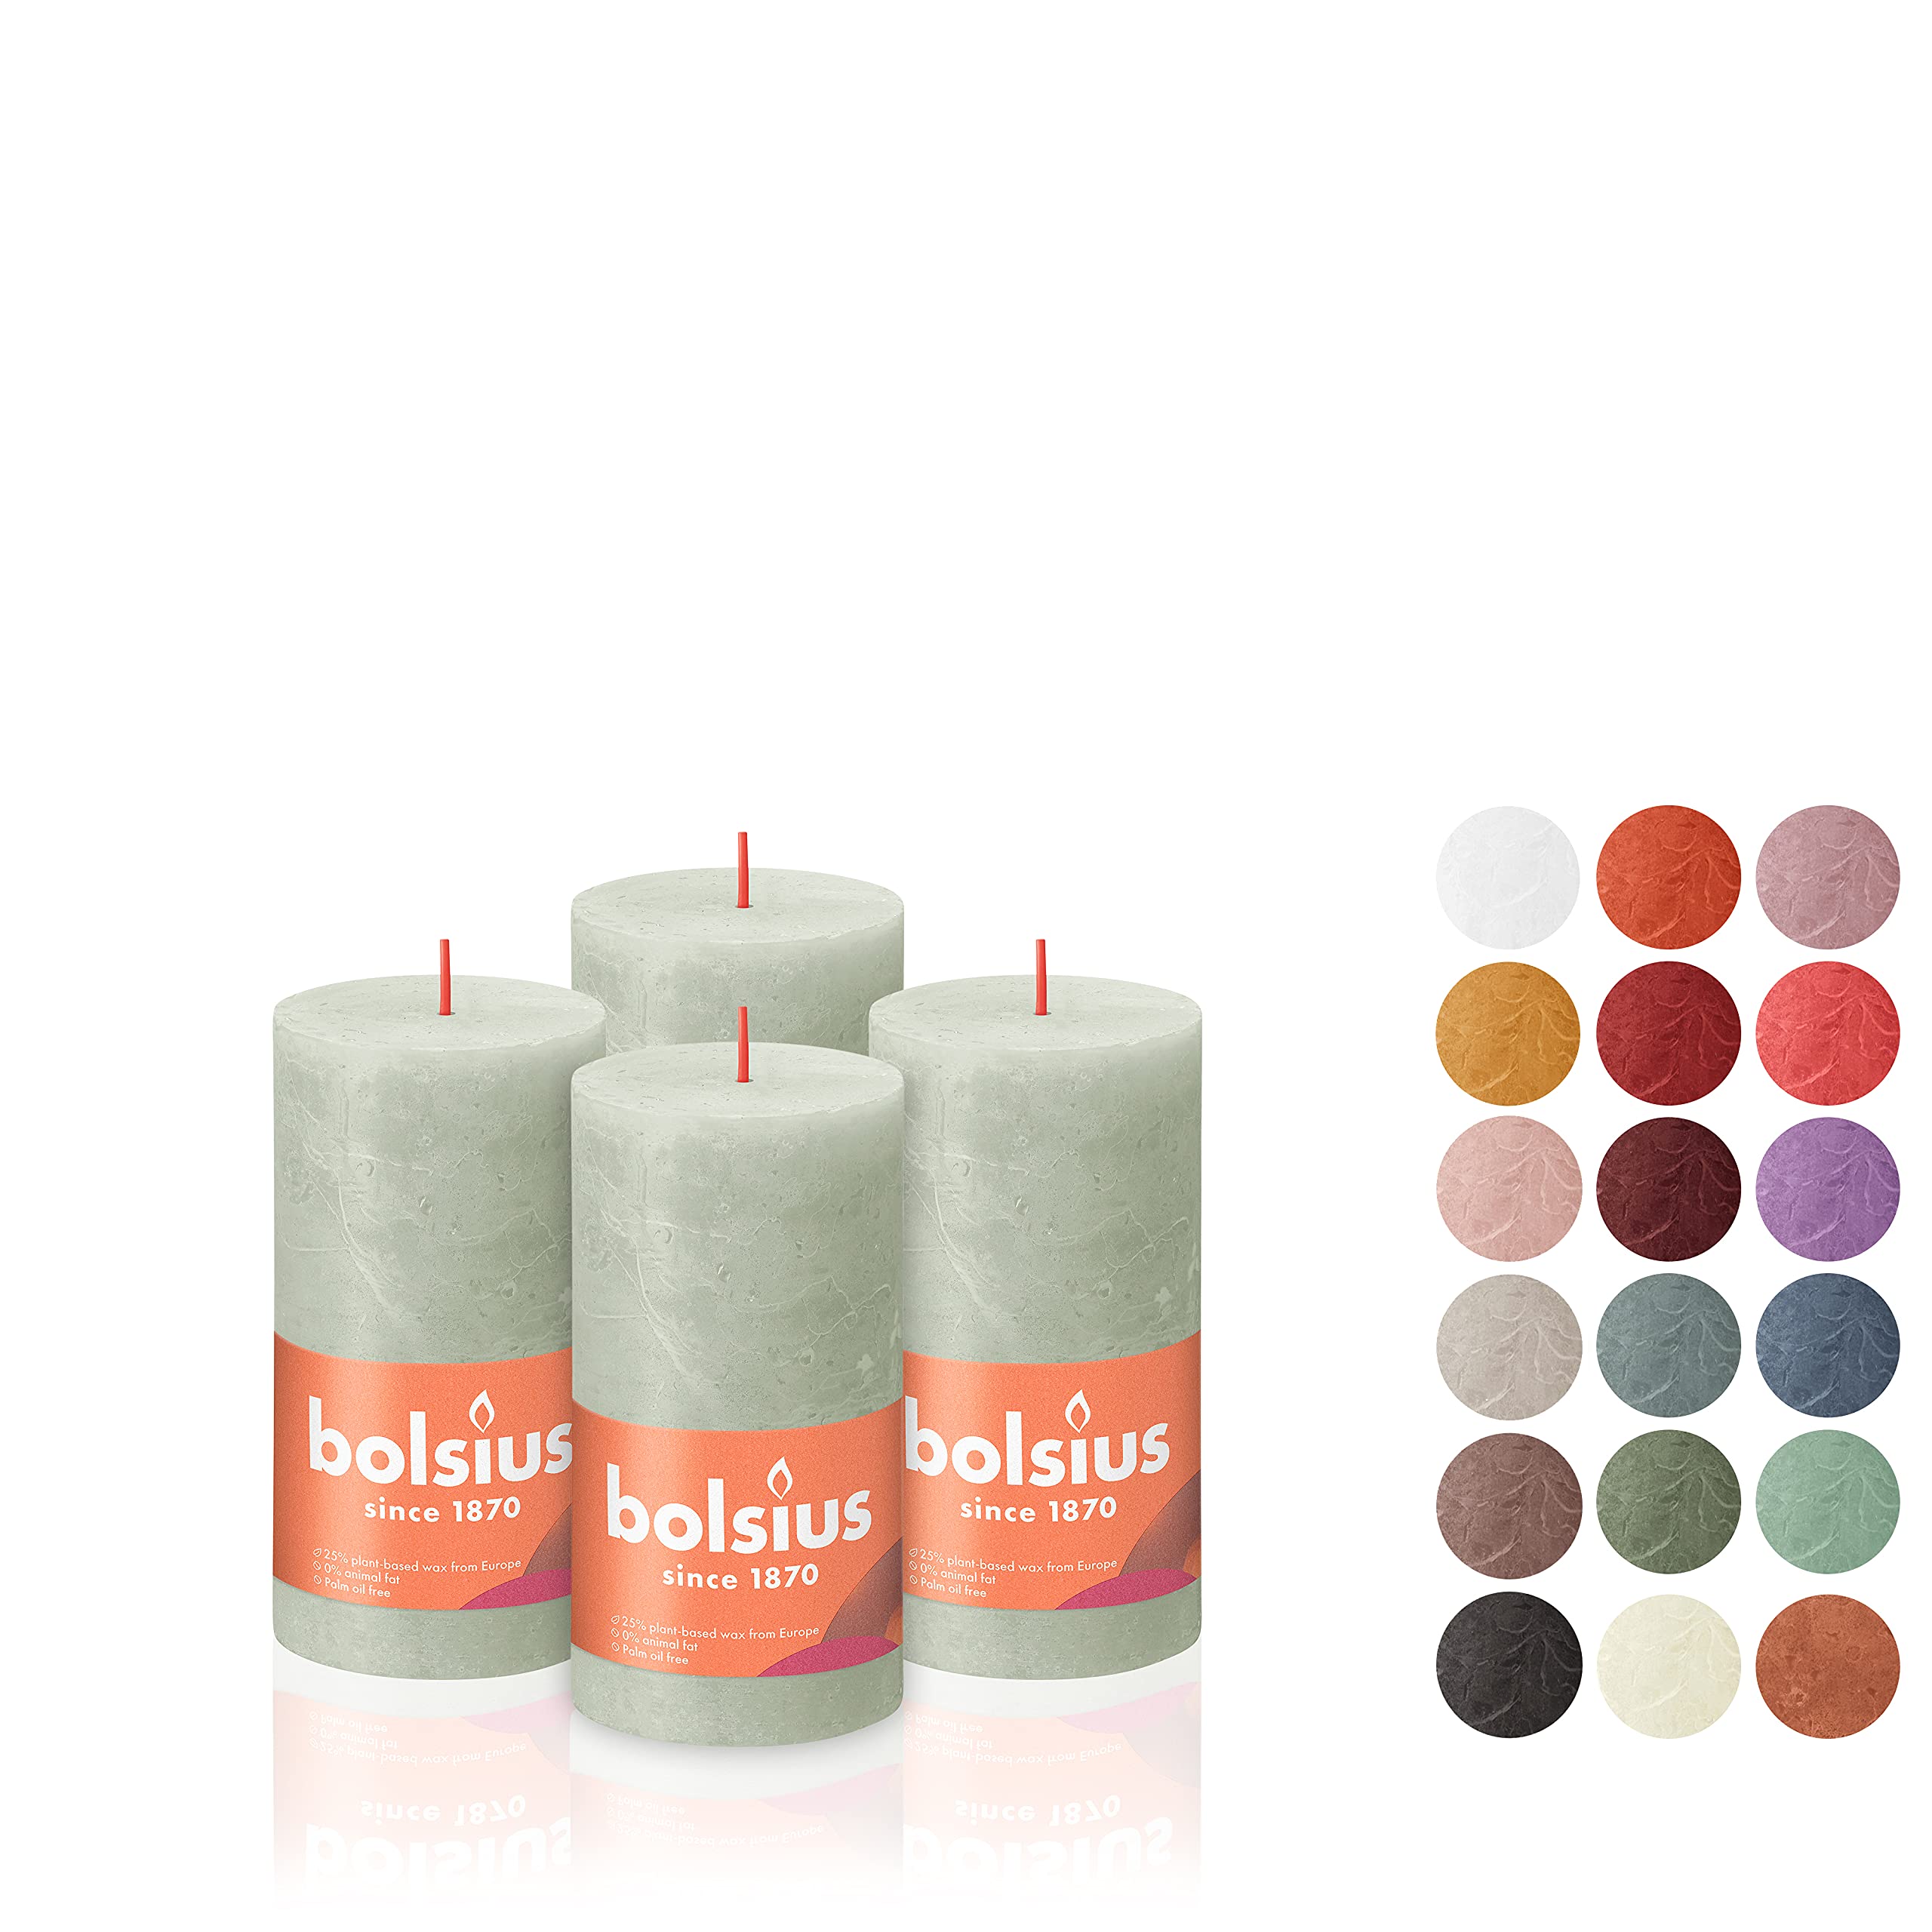 BOLSIUS 4 Pack Foggy Green Rustic Pillar Candles - 2 X 4 Inches - Premium European Quality - Includes Natural Plant-Based Wax - Unscented Dripless Smokeless 30 Hour Party and Wedding Candles  - Very Good